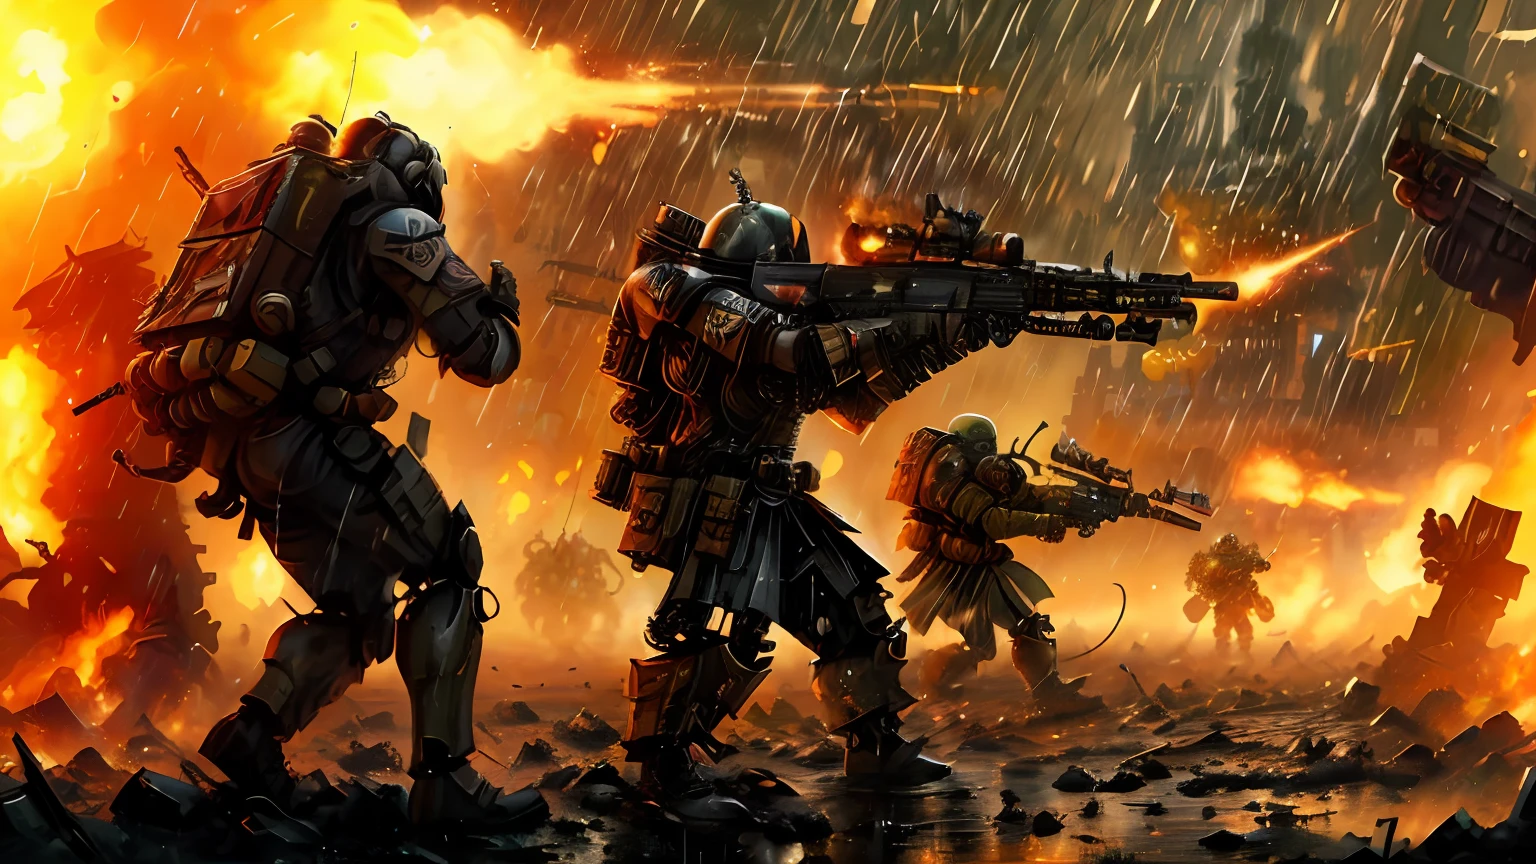 a group of soldiers with guns and fire in the rain, warhammer 40k style, warhammer 4 0 k artwork, warhammer 4k, warhammer 4 0 k!!, warhammer 40k!!, tactical team in hell, heavy weapons fire, fps game concept art, warhammer 40k, warhammer 4 0 k, warhammer40k, warzone background